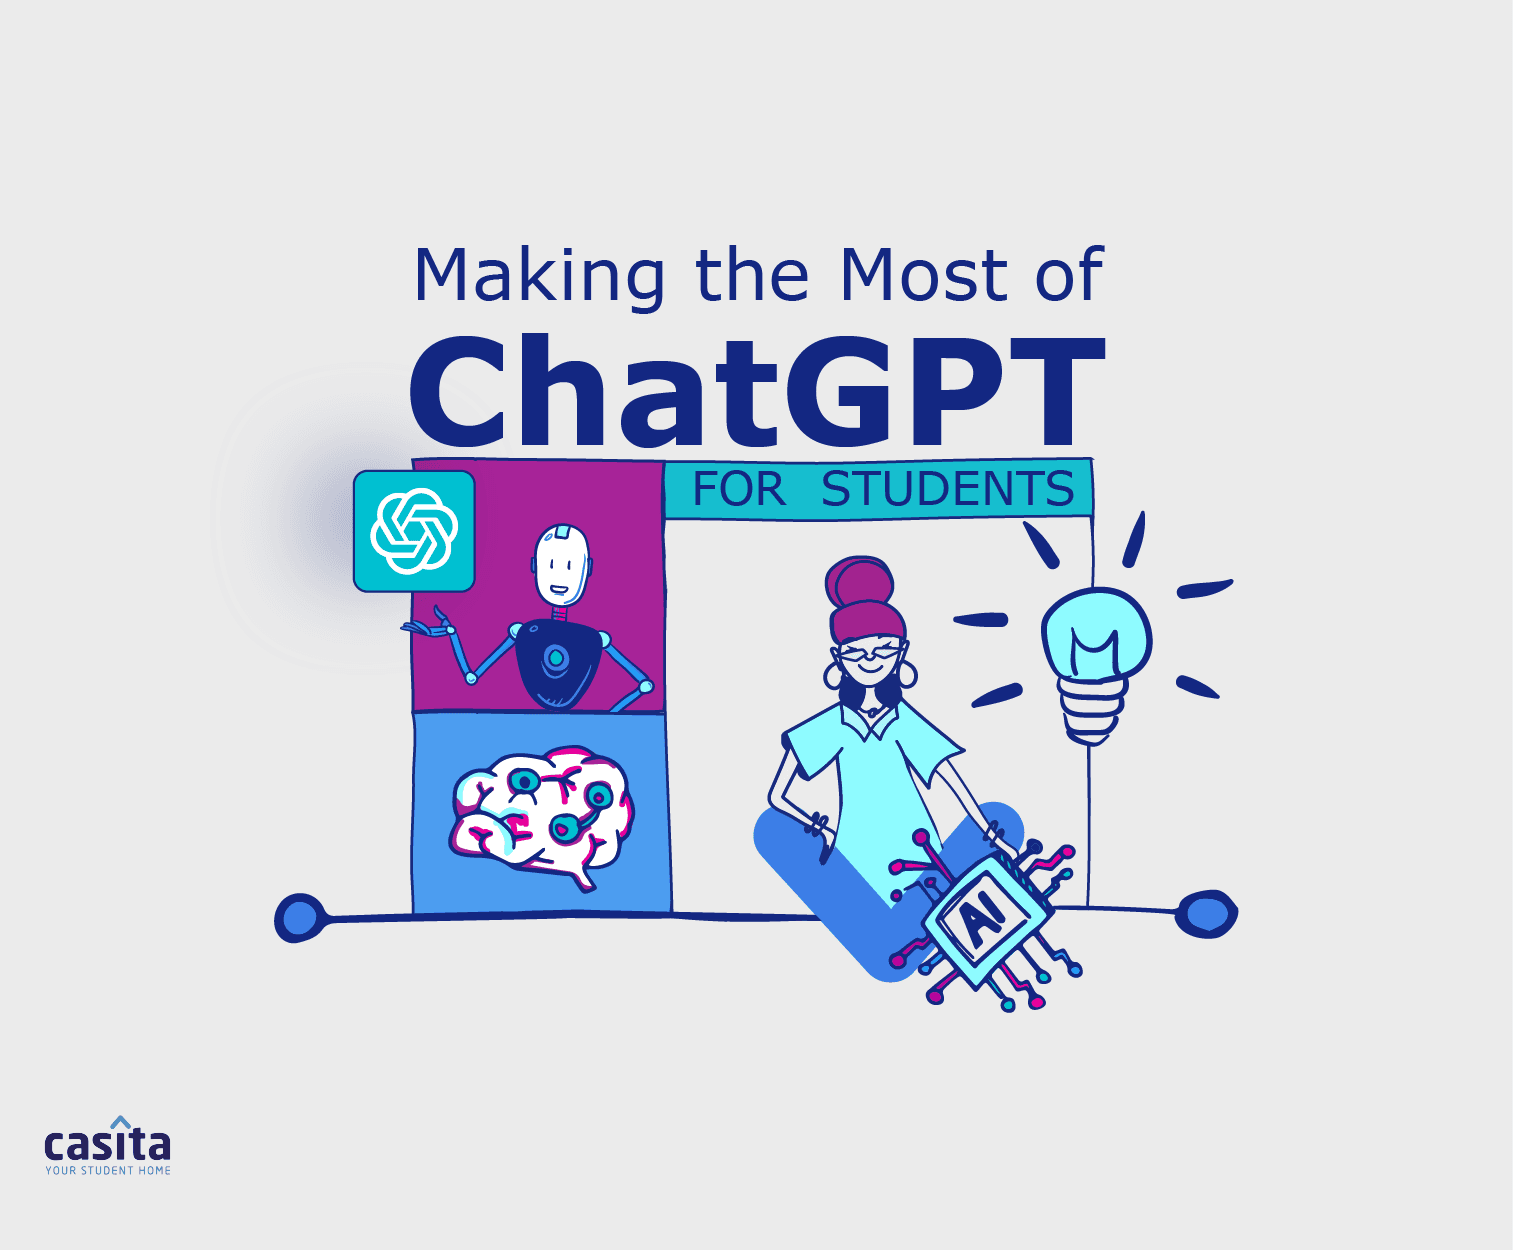 Making the Most of ChatGPT as a Student